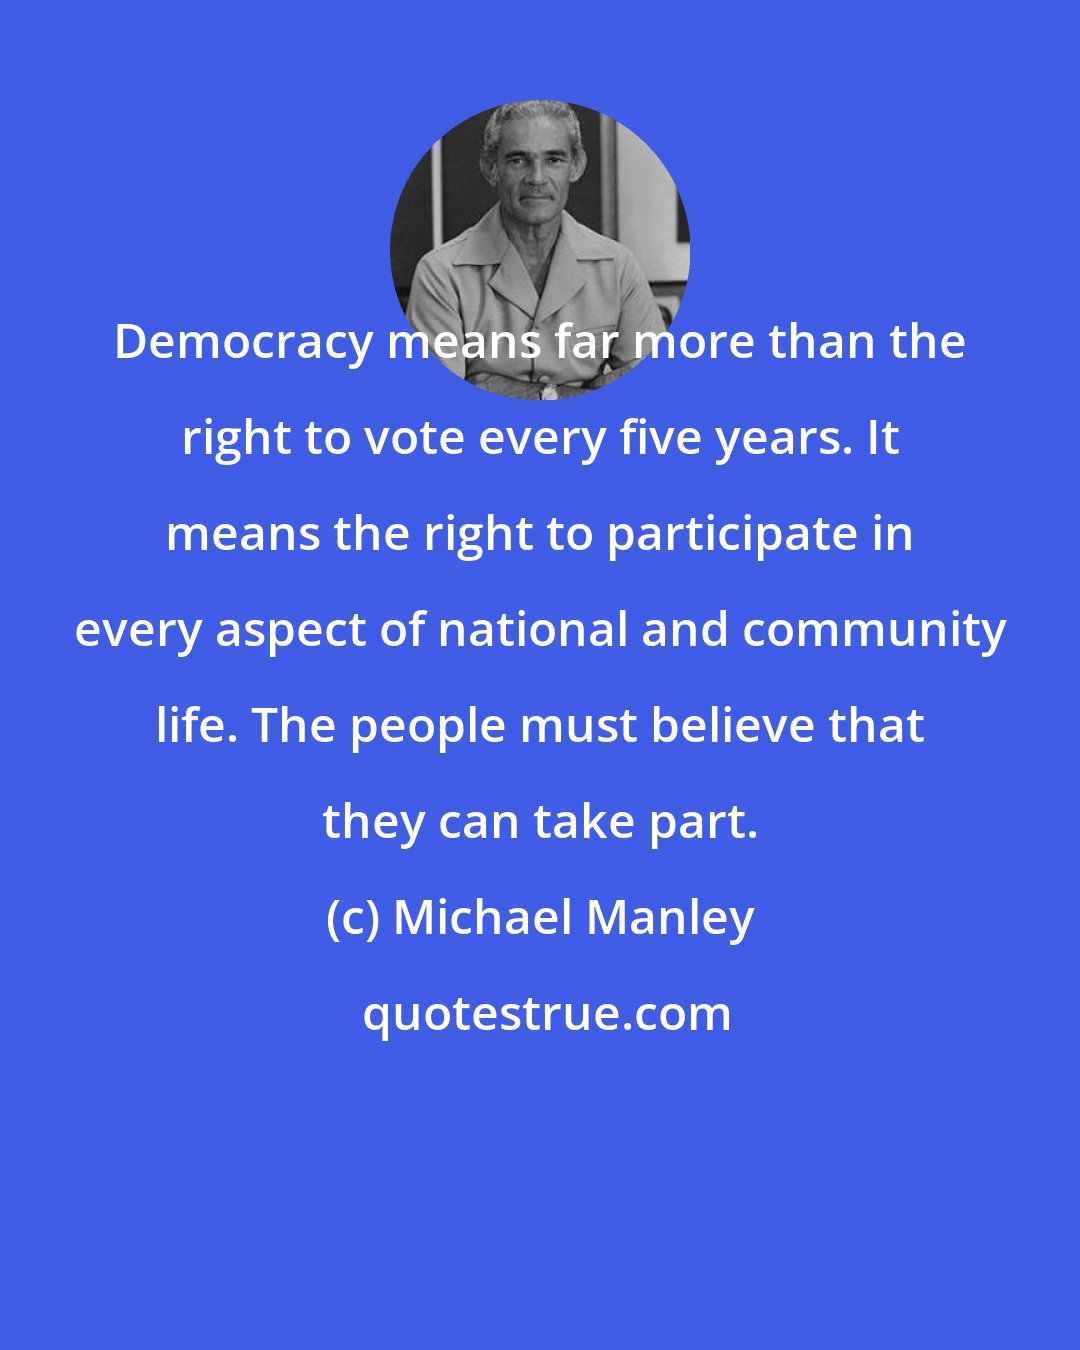 Michael Manley: Democracy means far more than the right to vote every five years. It means the right to participate in every aspect of national and community life. The people must believe that they can take part.